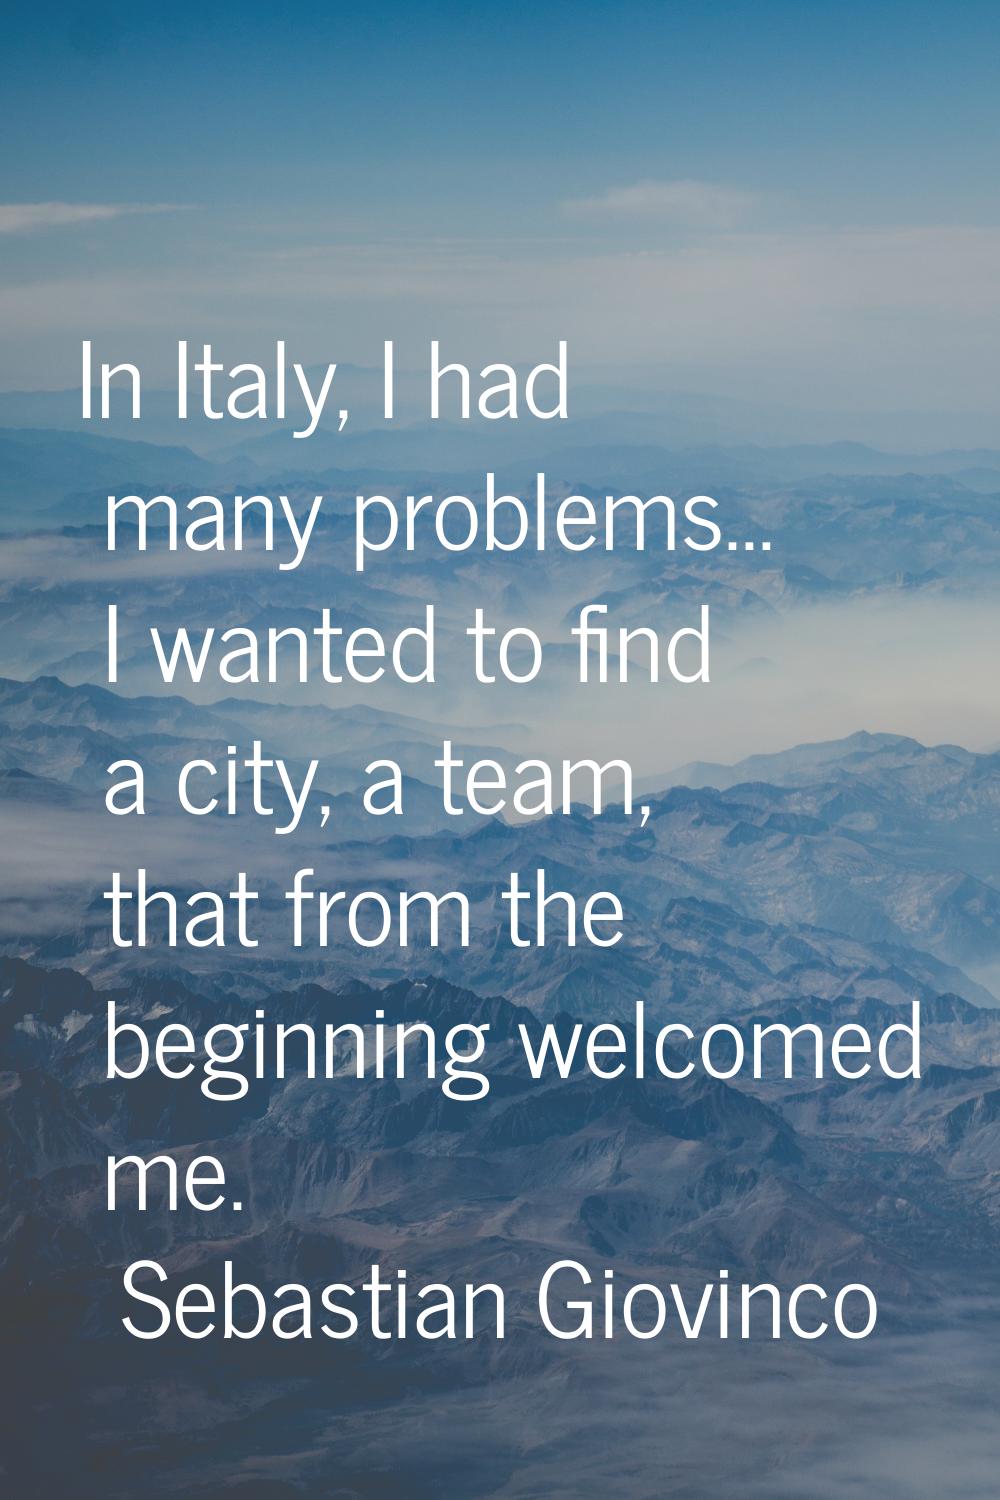 In Italy, I had many problems… I wanted to find a city, a team, that from the beginning welcomed me